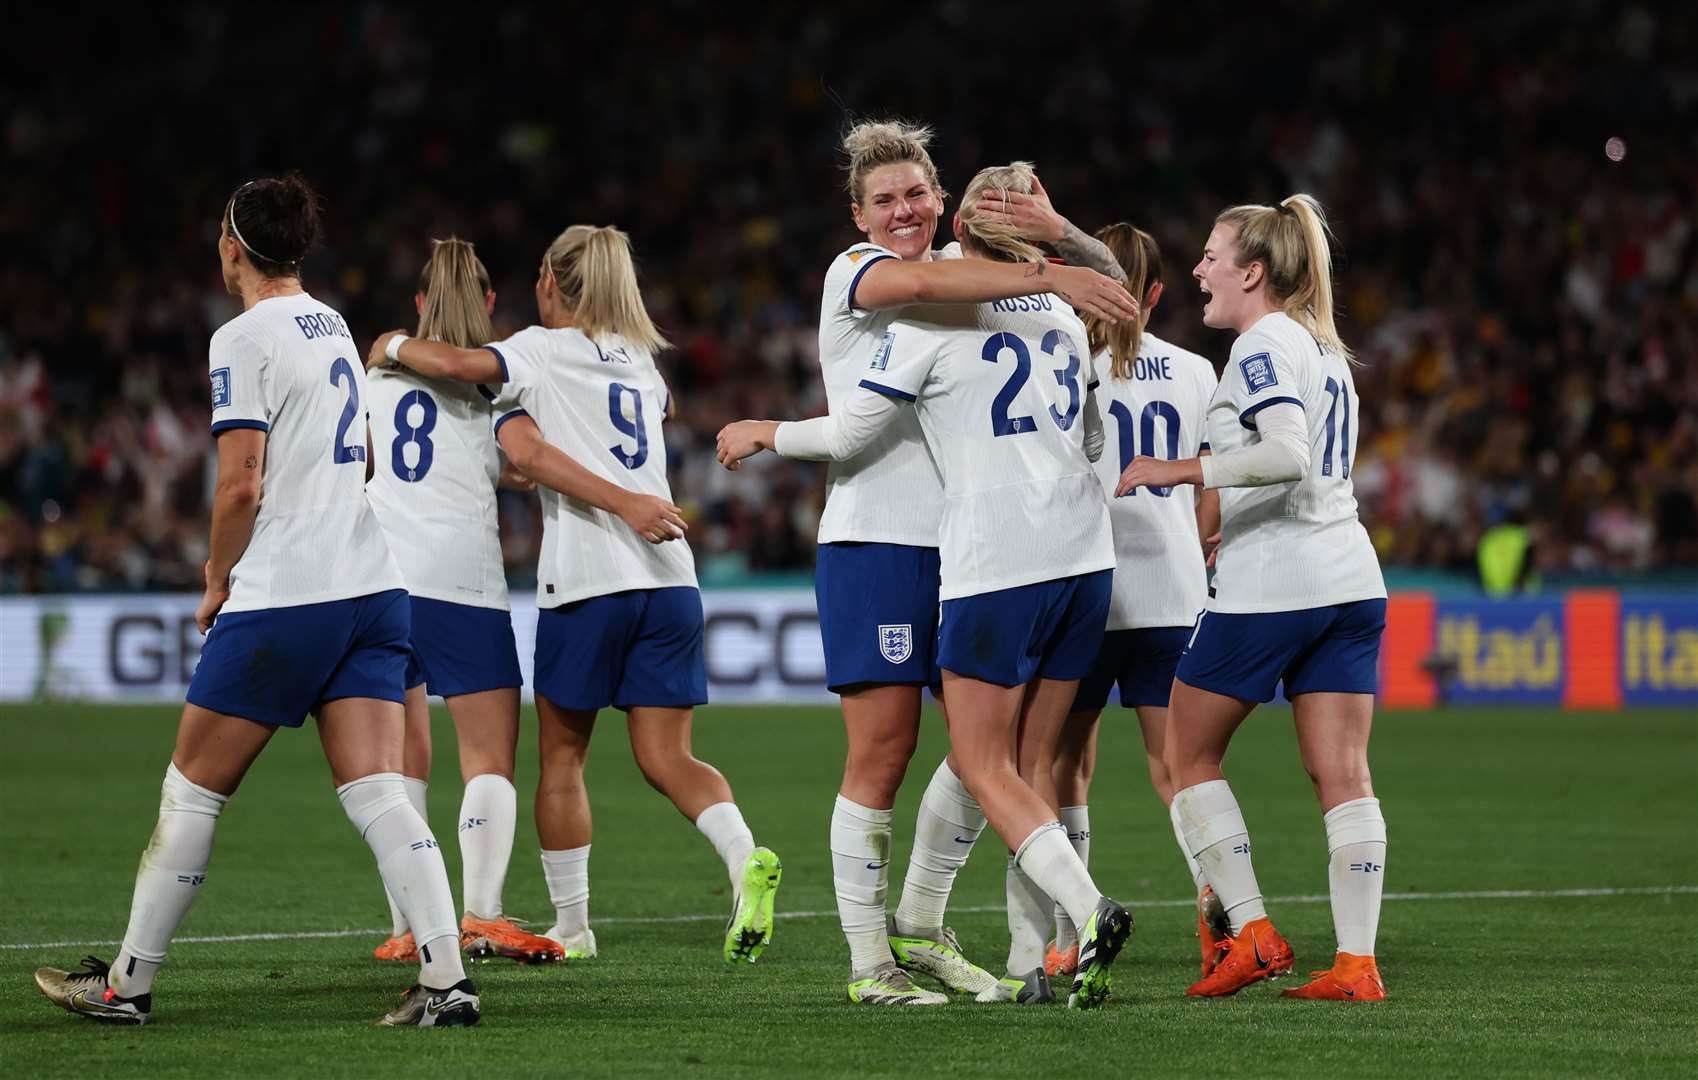 England secured their place in the semi finals with a 2-1 win over Colombia (Isabel Infantes/PA)